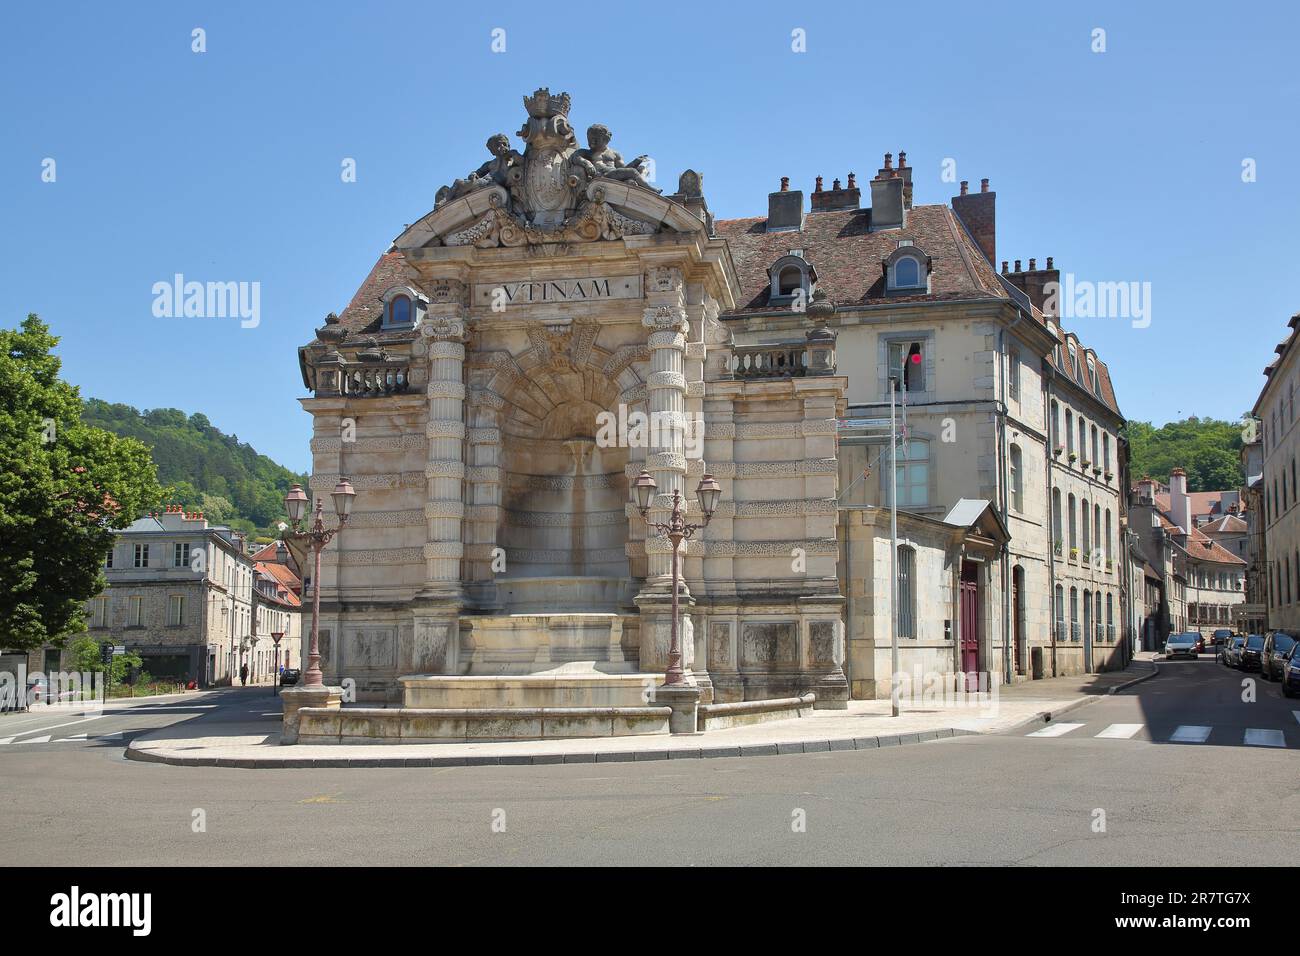 Fontaine Saint-Quentin built in 1529 at Place Jean Cornet, ornamental fountain with columns, ornaments and figures, Besancon, Doubs, France Stock Photo